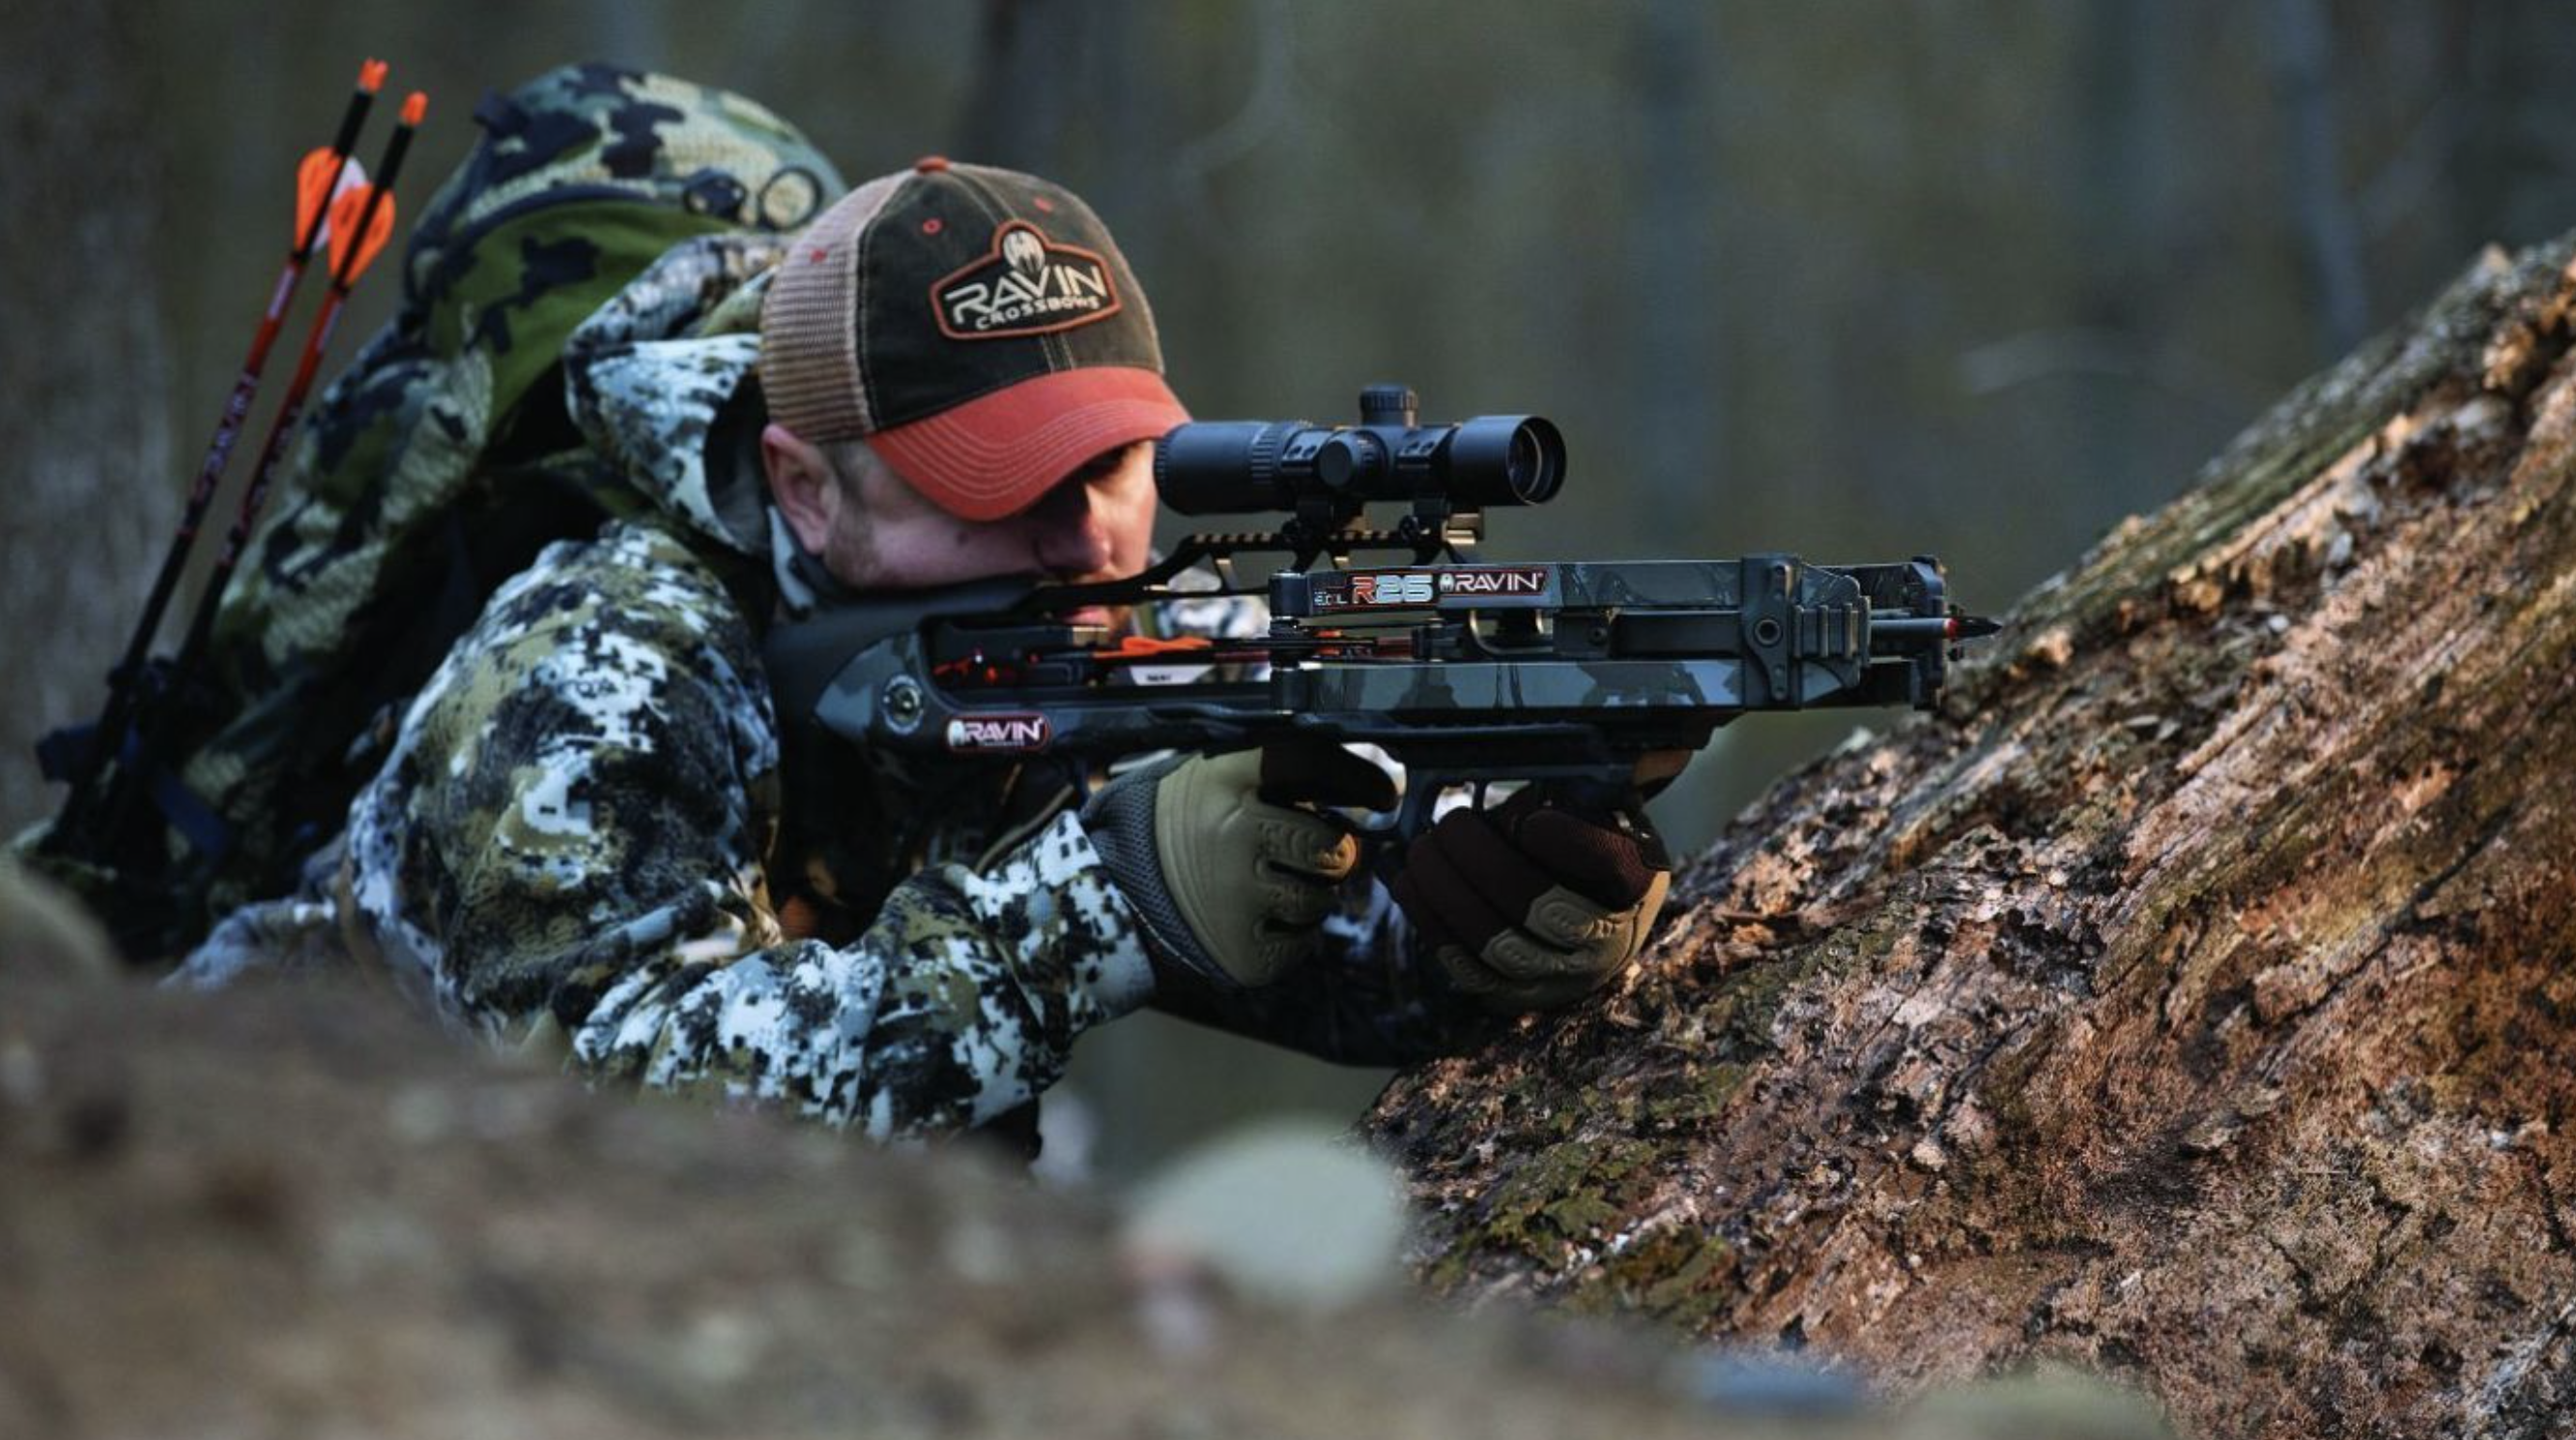 ravin-r26-review-the-best-crossbow-for-deer-hunting-outdoor-life